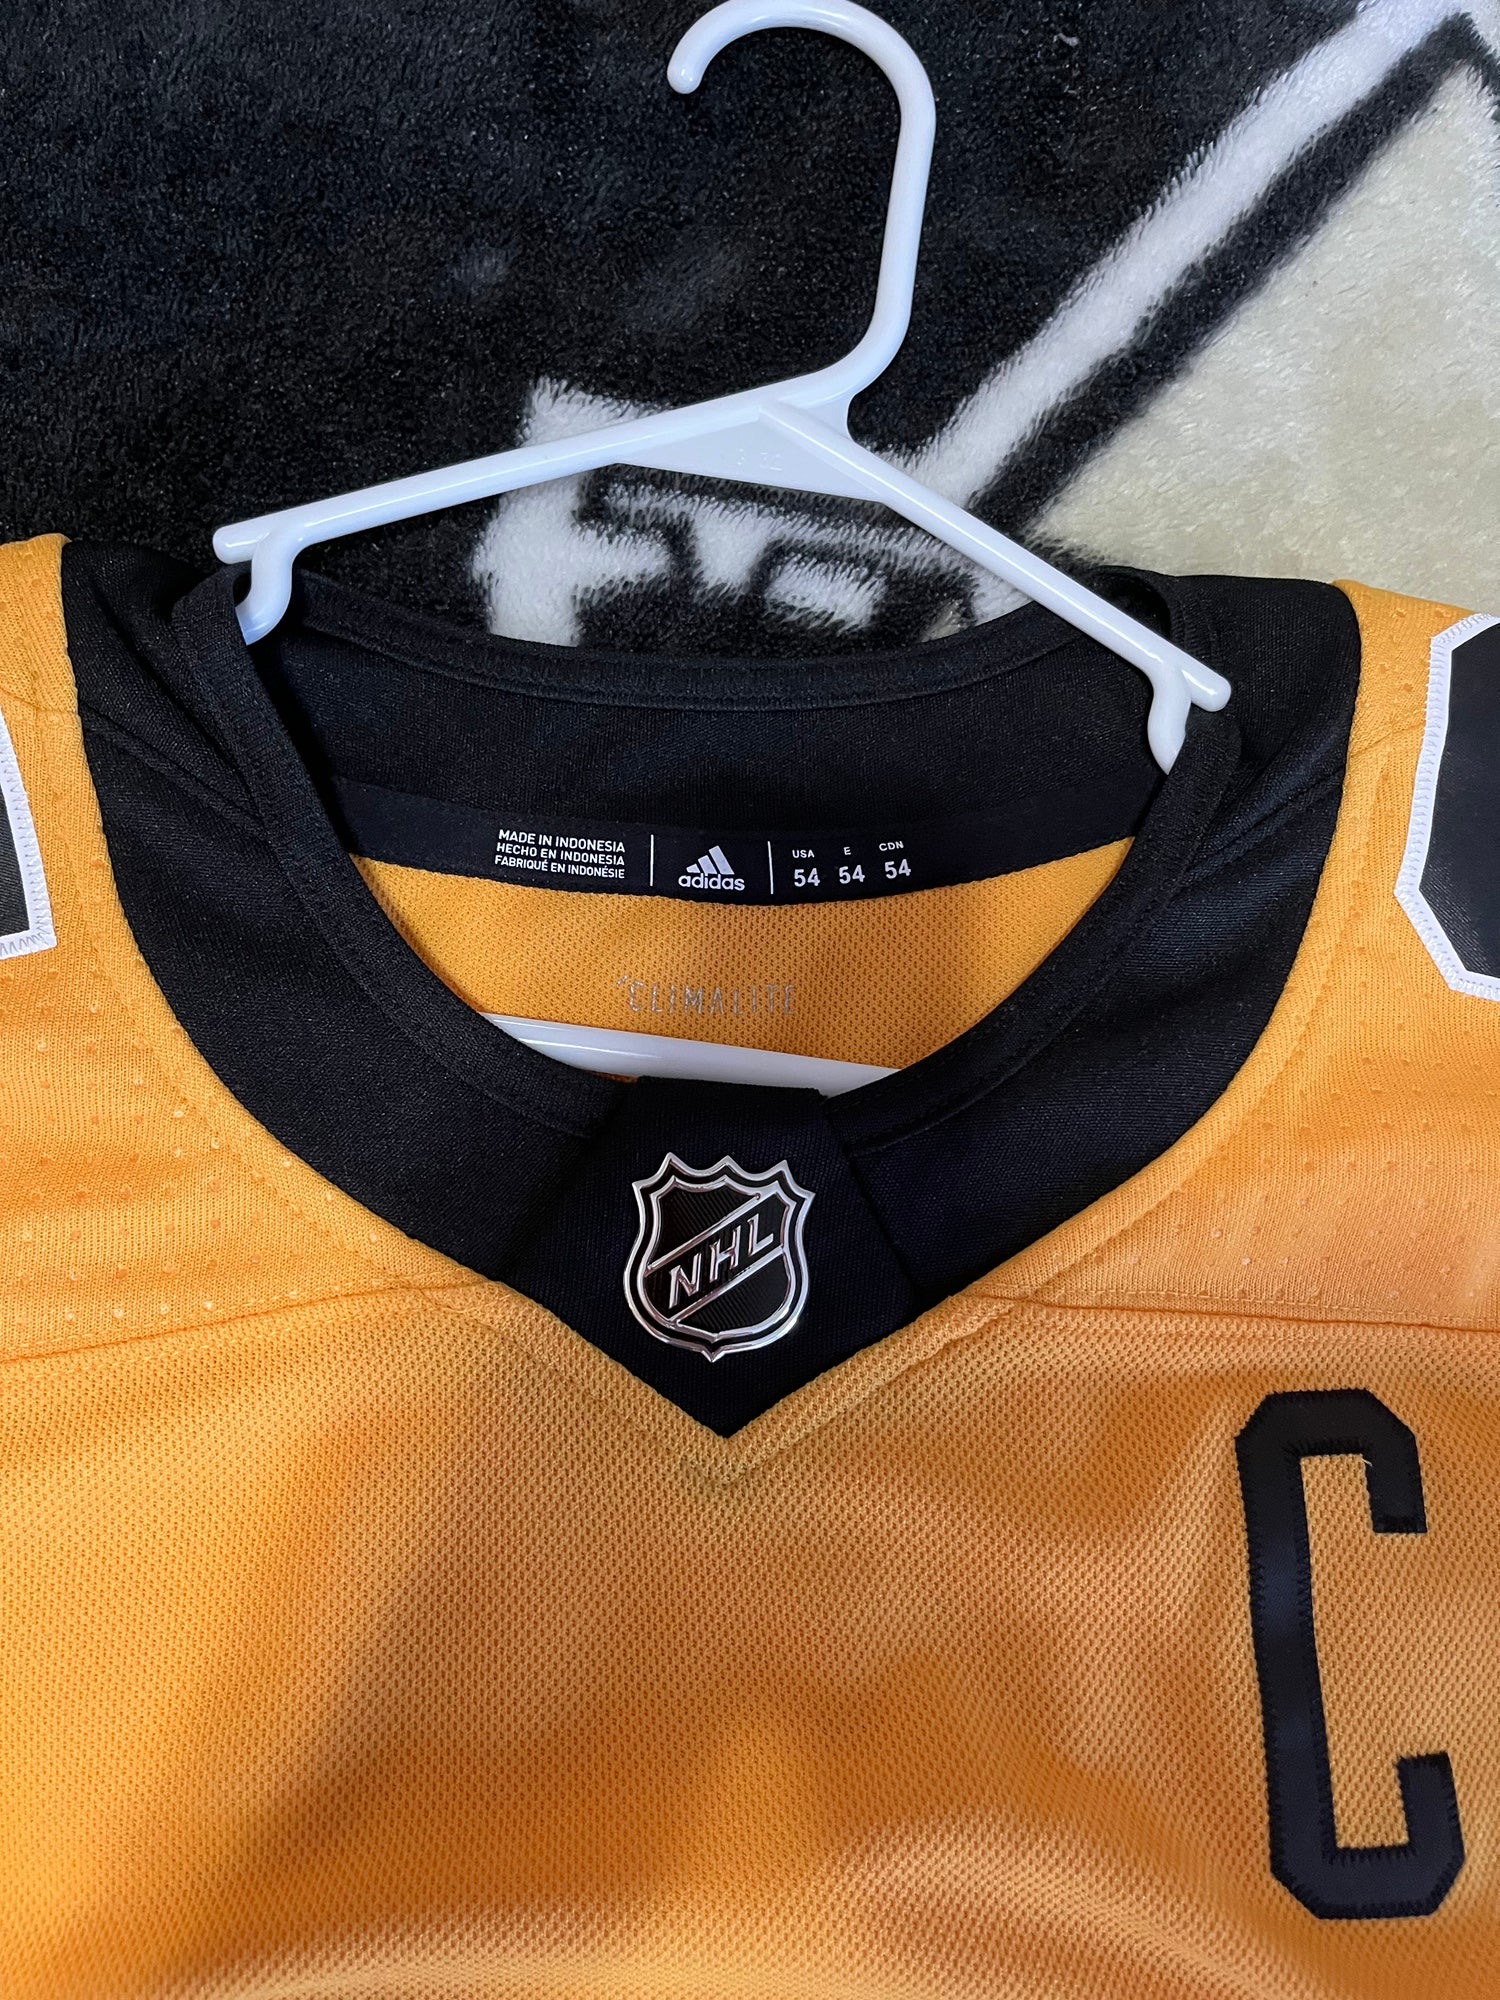 New Sidney Crosby Penguins Yellow Alt Adidas Jersey (Size 54)